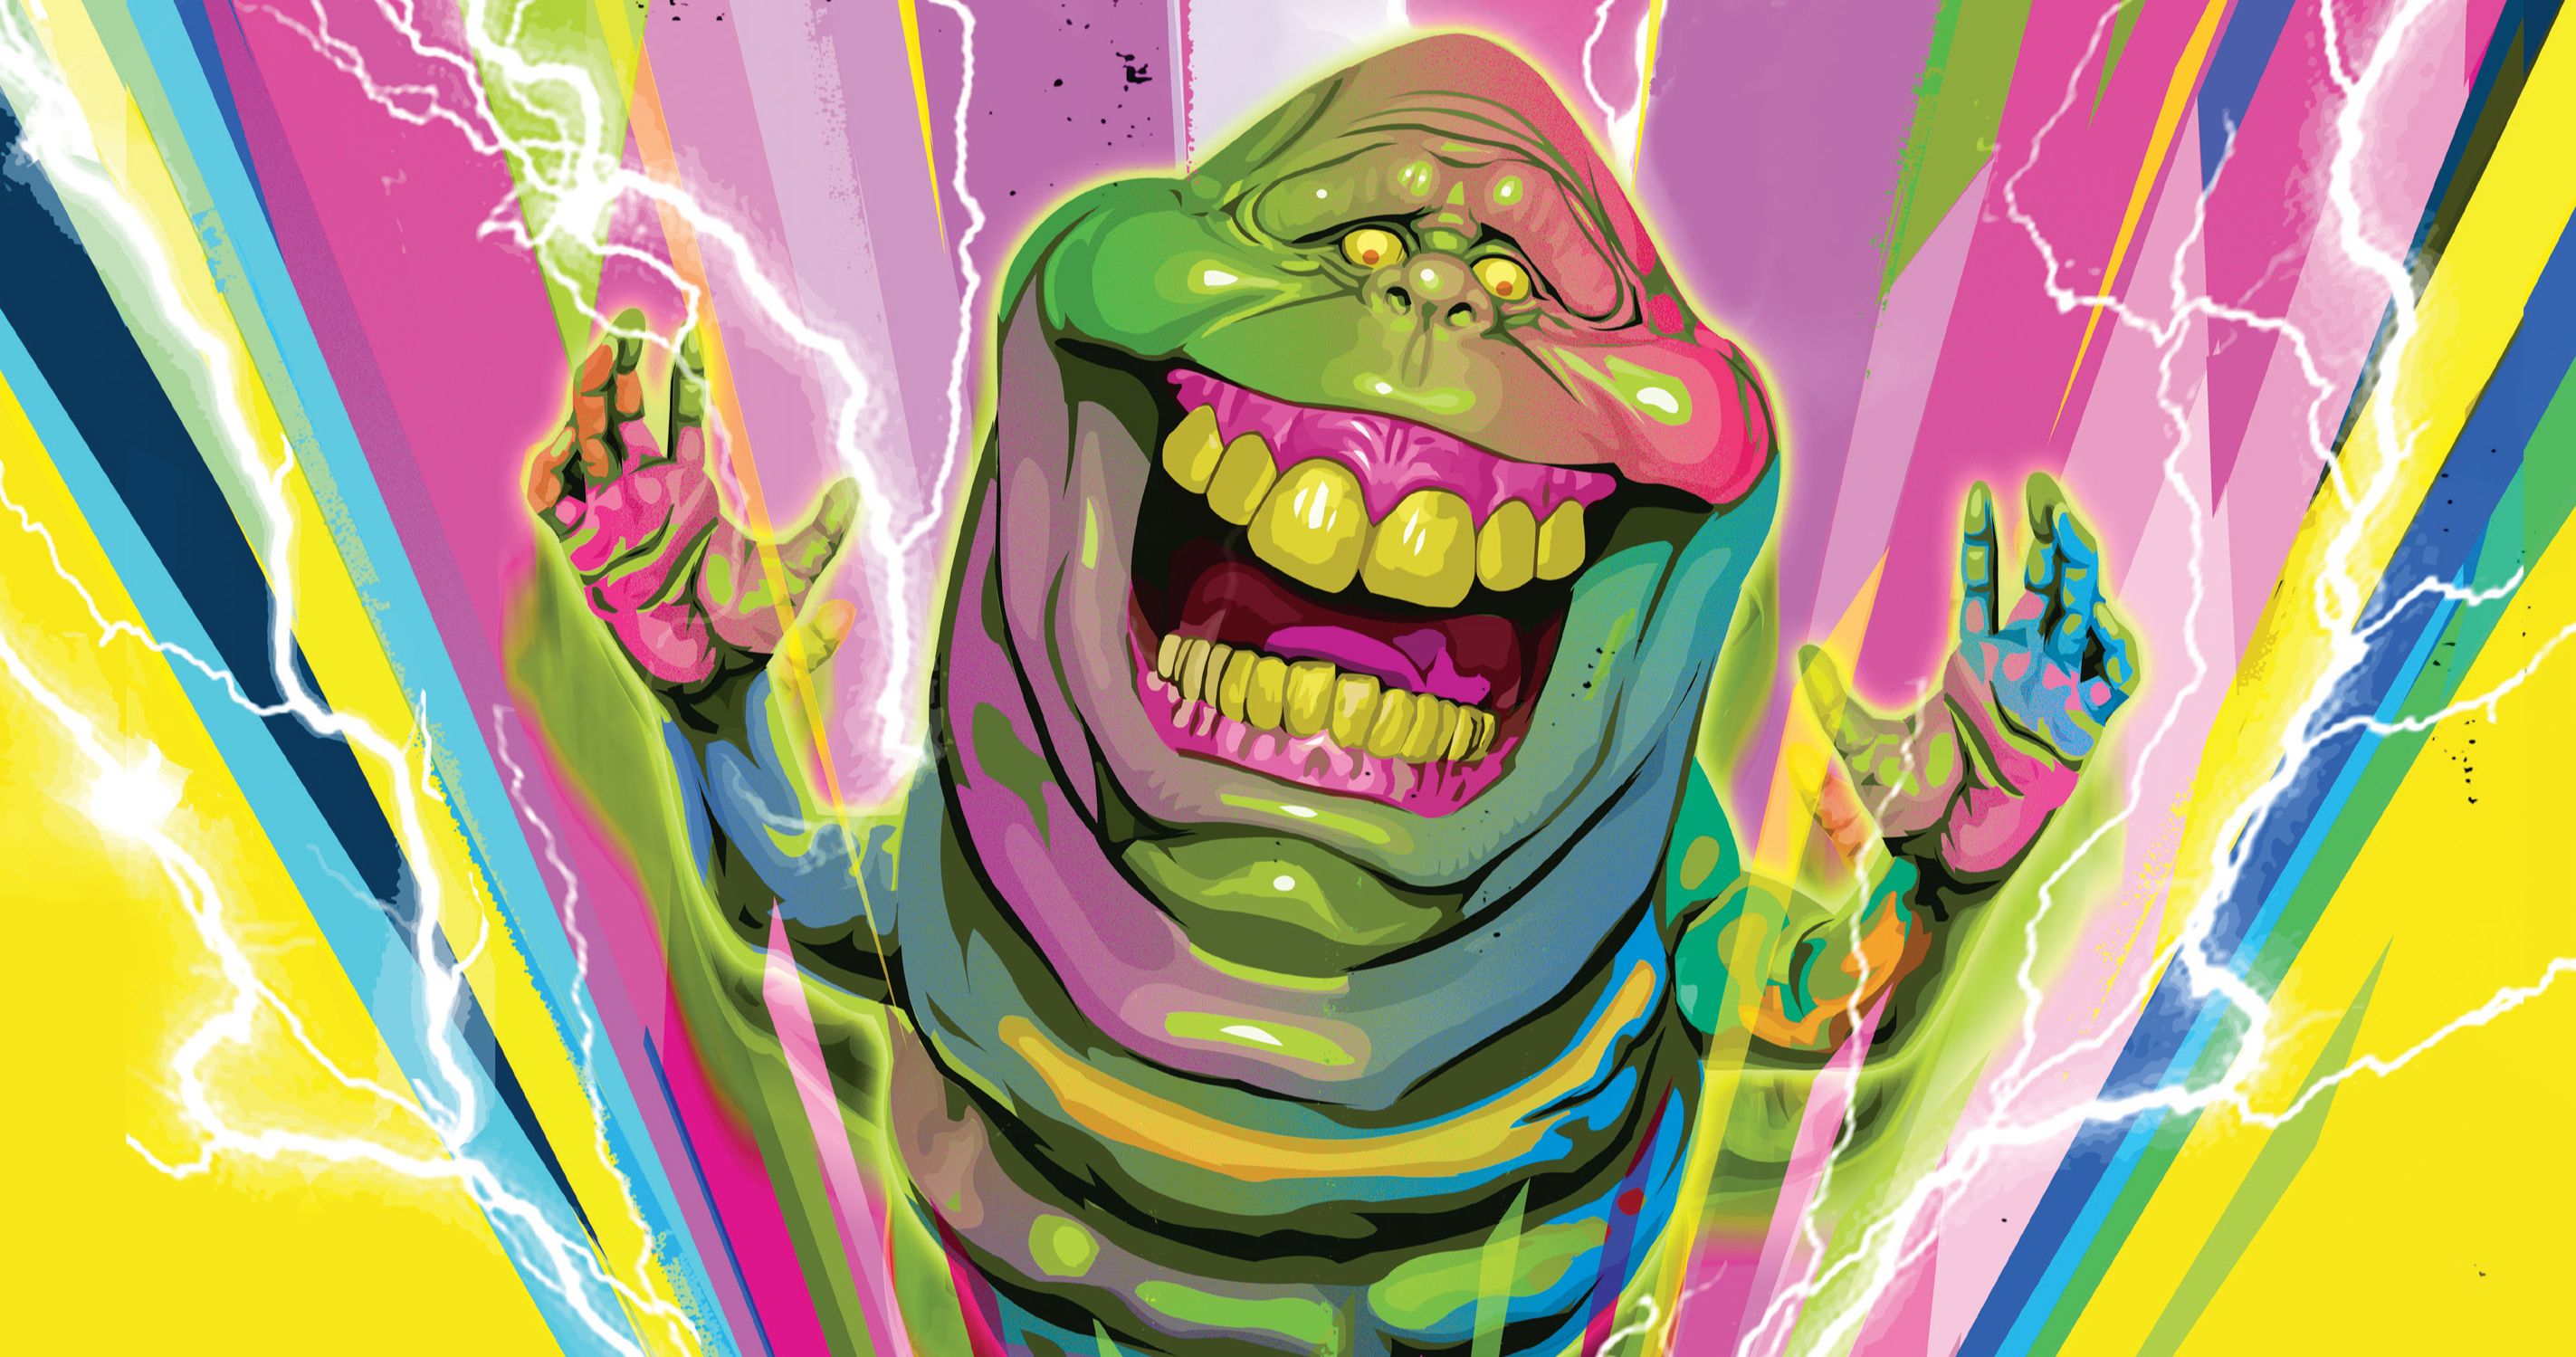 Insane Ghostbusters Artbook Celebrates the Iconic Franchise with All-new Original Art